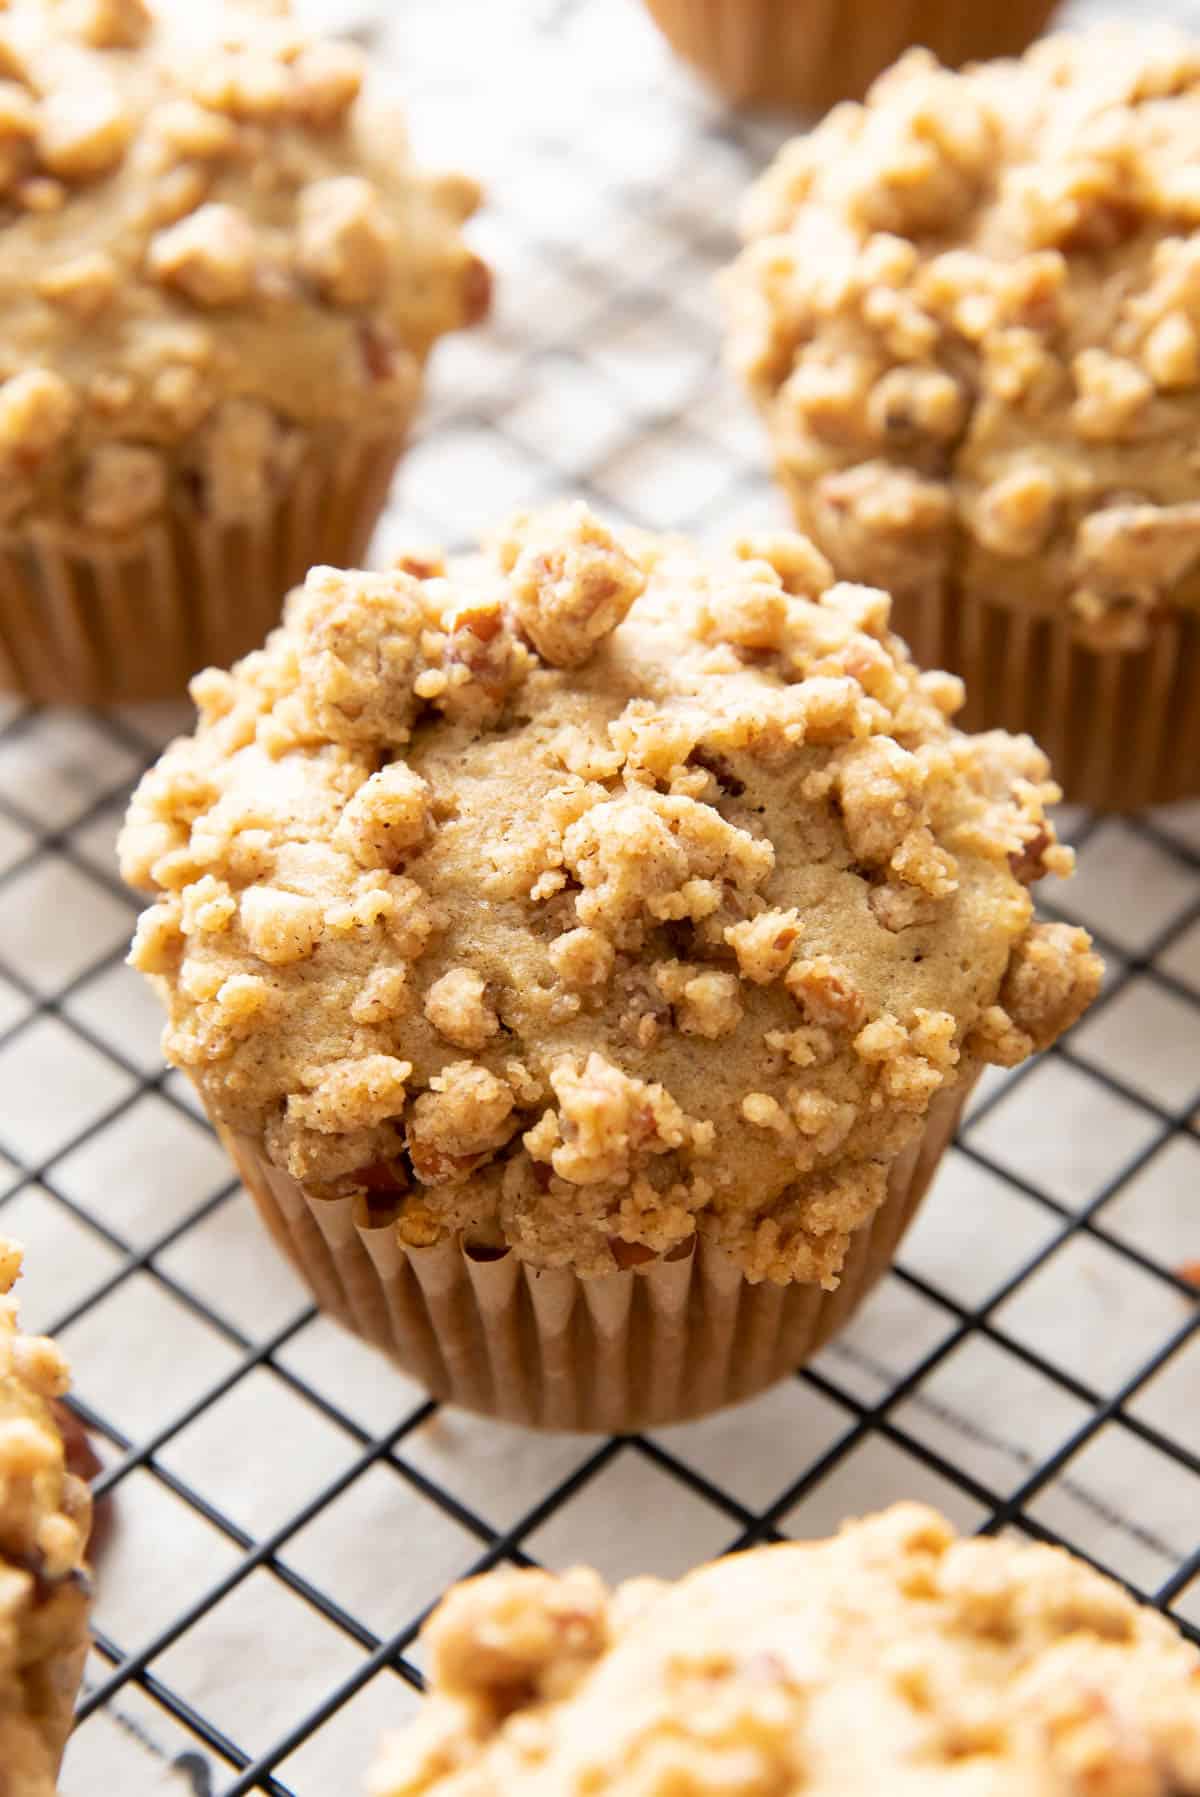 Angled photo of cinnamon streusel muffins to show crumbly topping